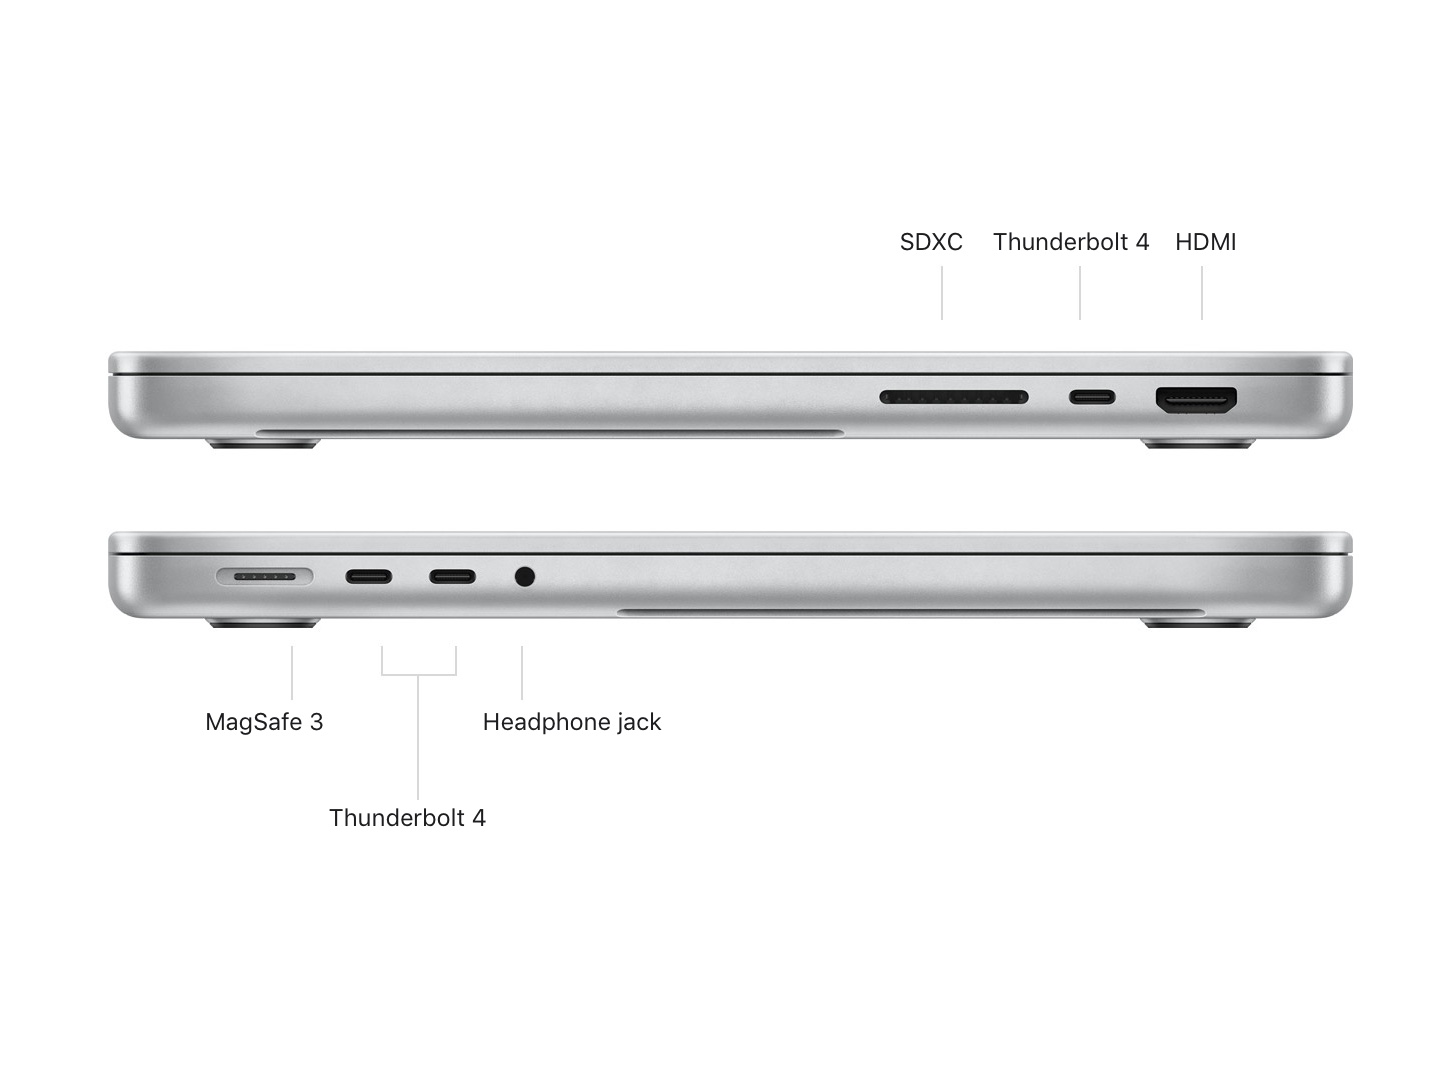 Apple's new 2021 MacBook Pro only comes with an HDMI 2.0 port